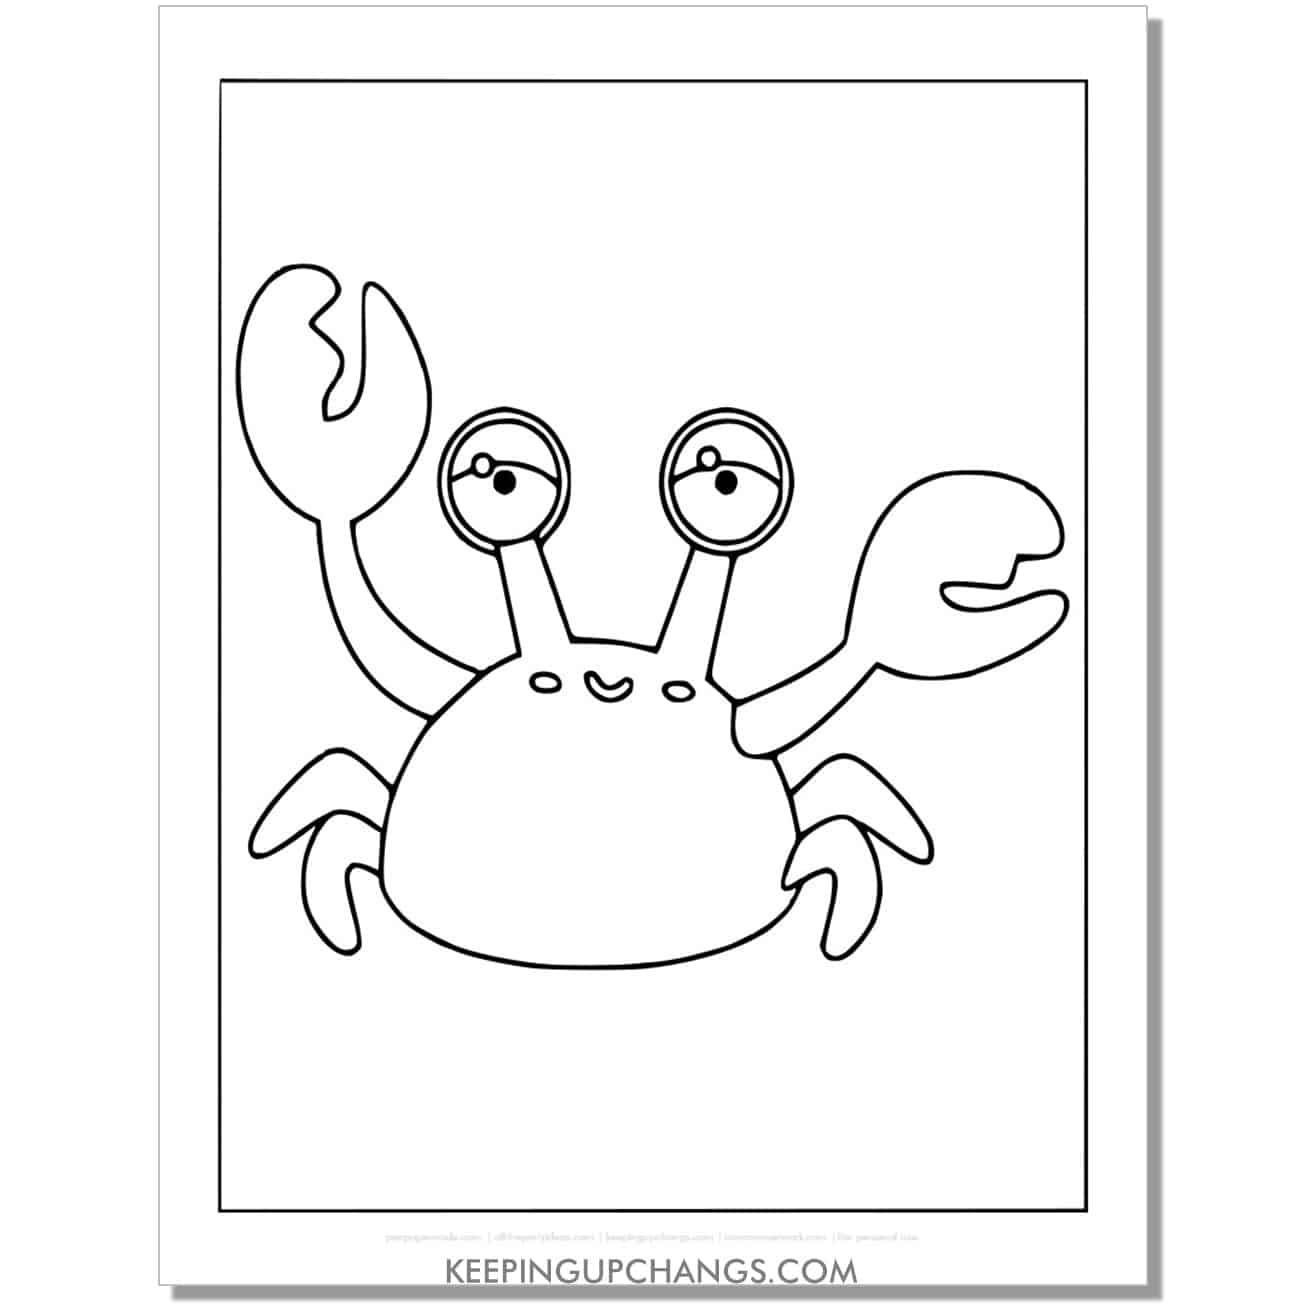 free tired crab coloring page, sheet.